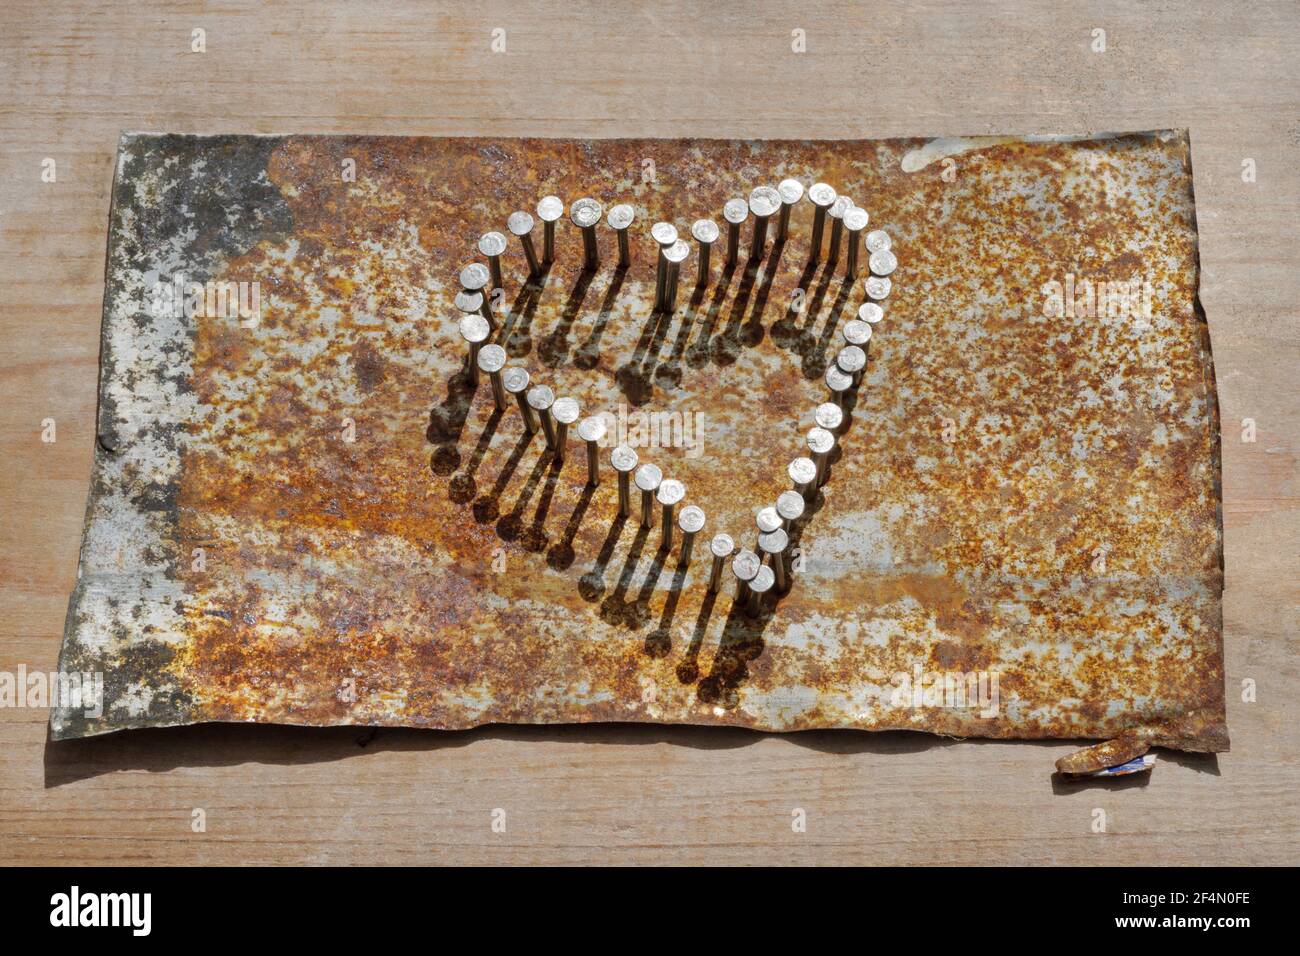 Heart of nails hammered into flattened rusty tin over wooden plank. Stock Photo